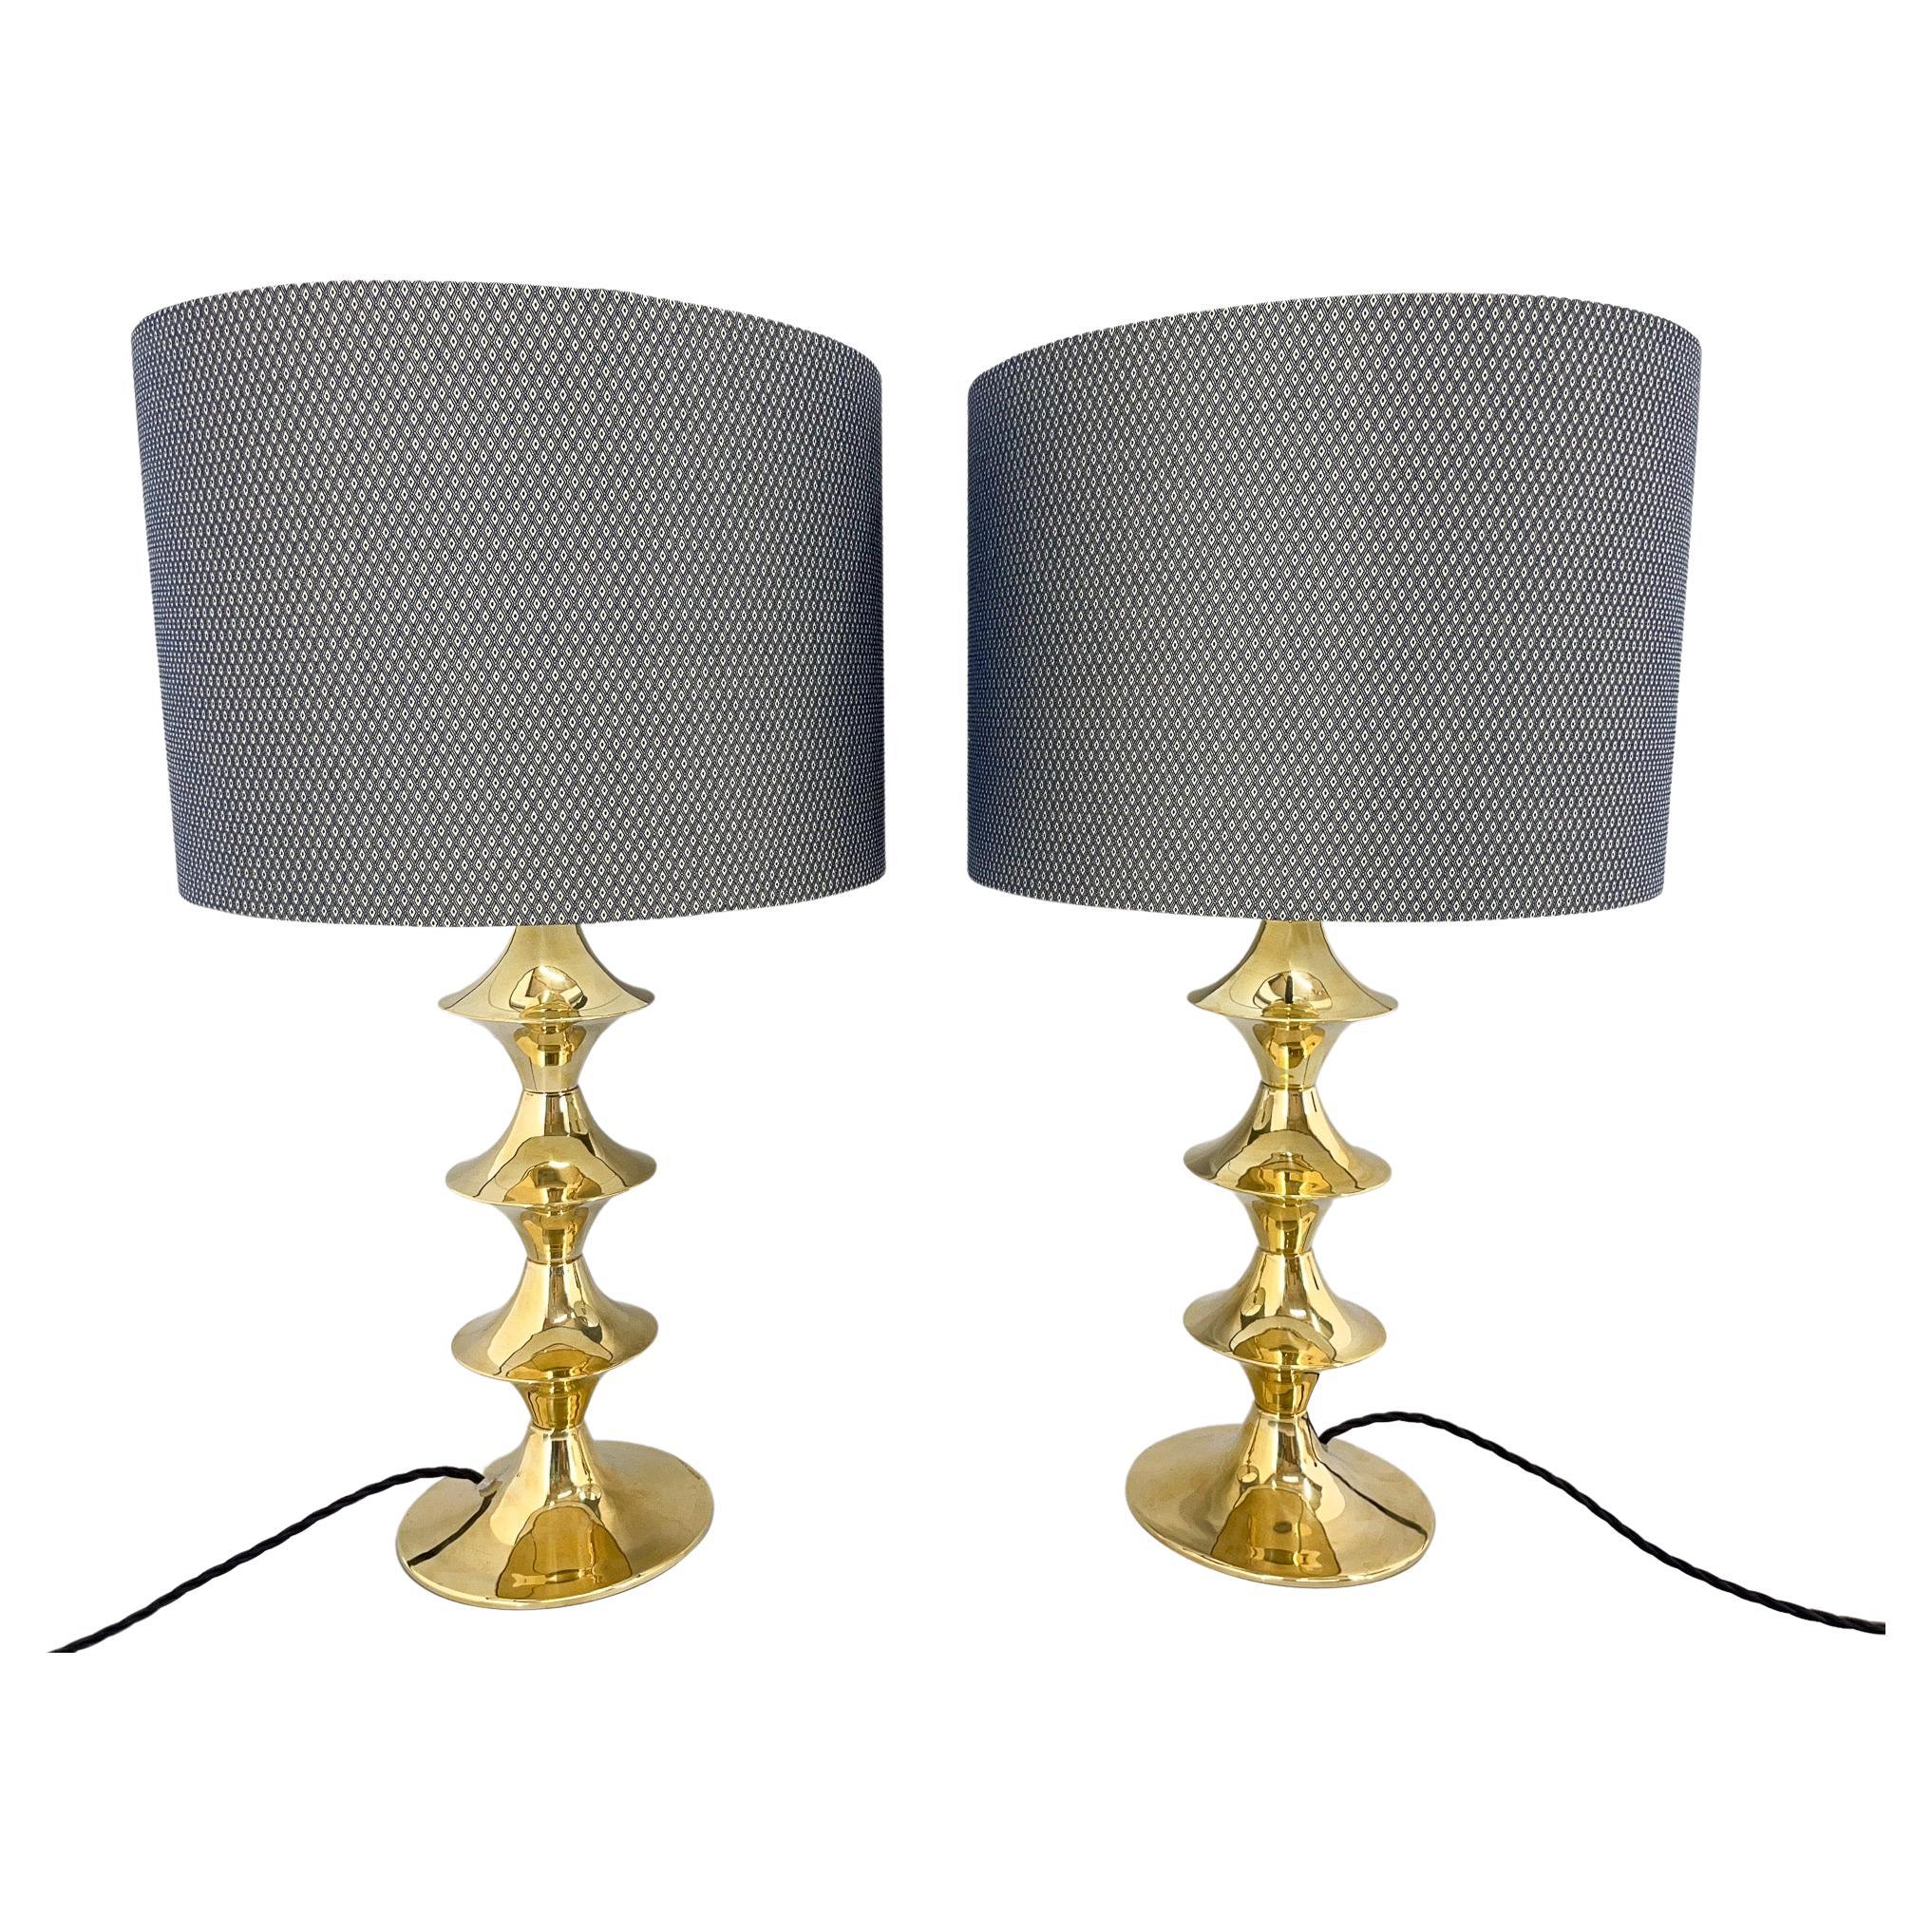 Pair of Mid-Century Brass Table Lamps, 1950s, Restored